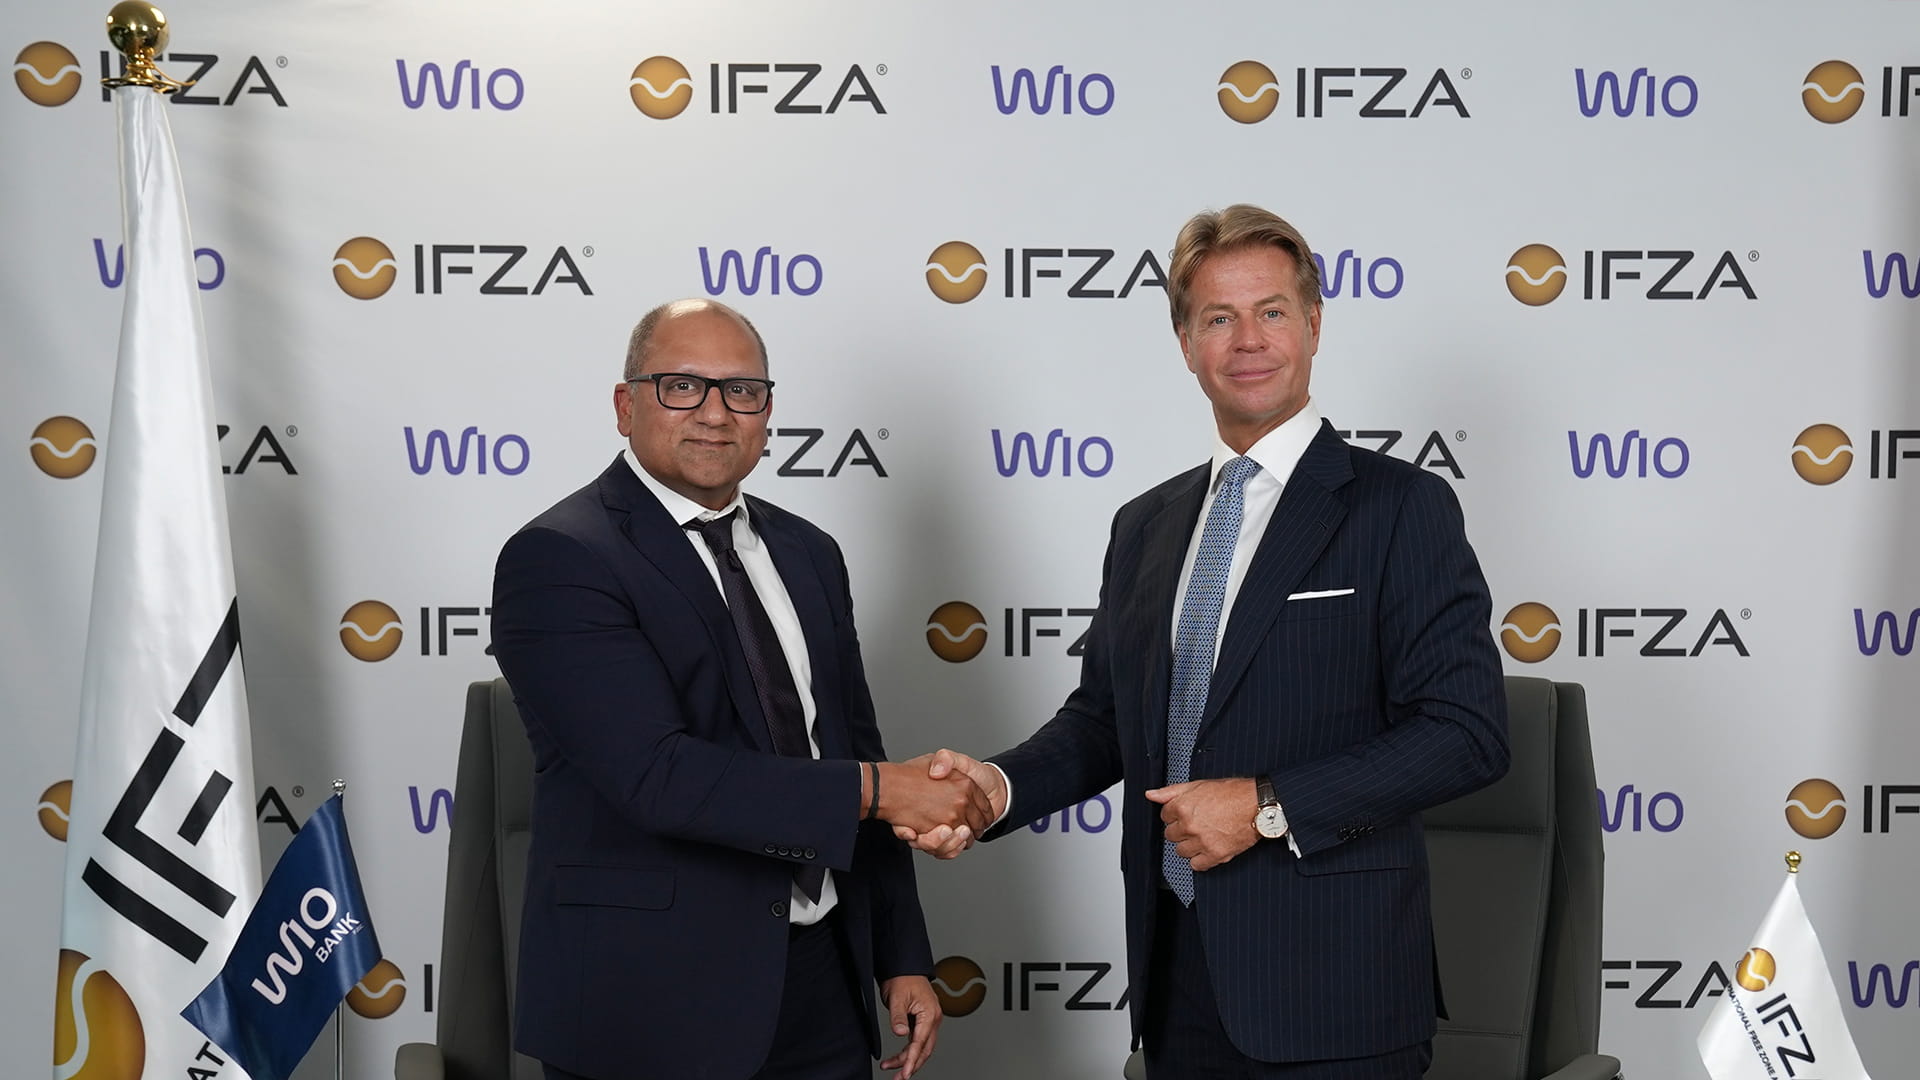 IFZA partners with wio bank to provide digital banking services in Dubai